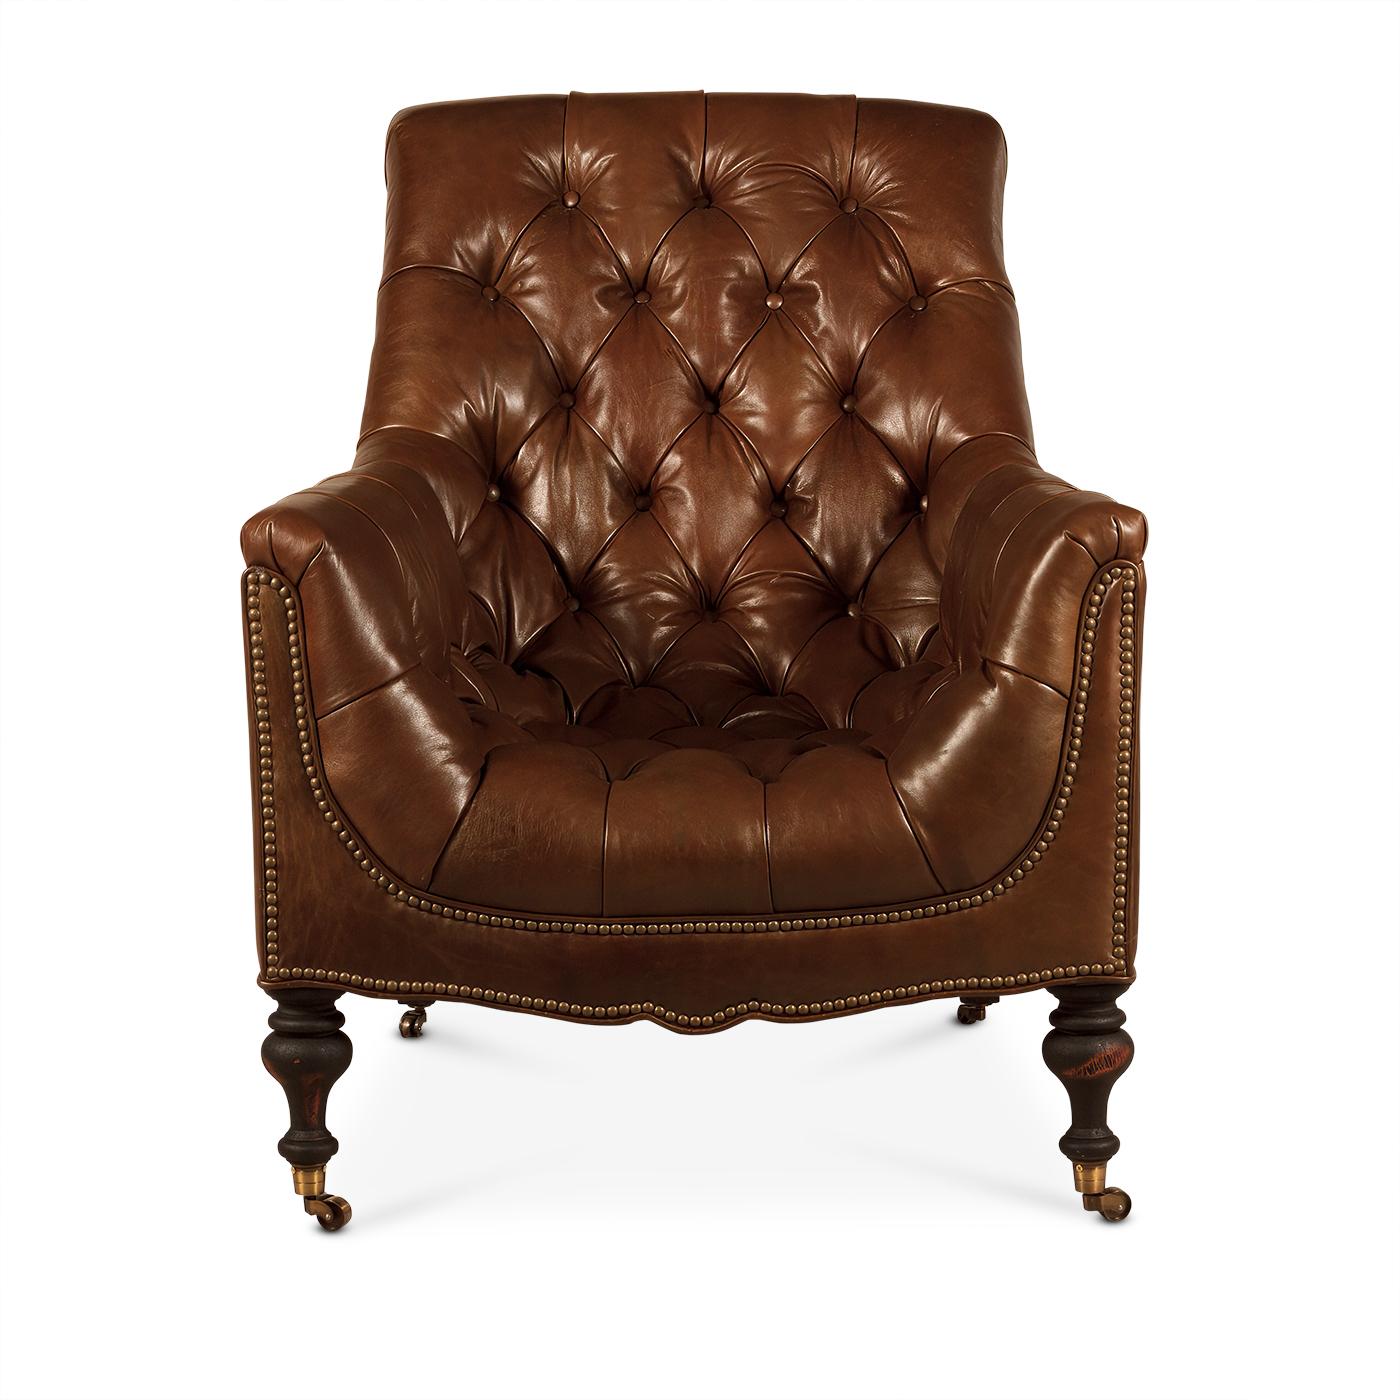 A Classic traditional English look, this tufted leather club chair is comfortable, stylish and will sit well among both modern and traditional decor.

With deep tufted cushions to the backrest and arms, with brass nailhead trim details on turned